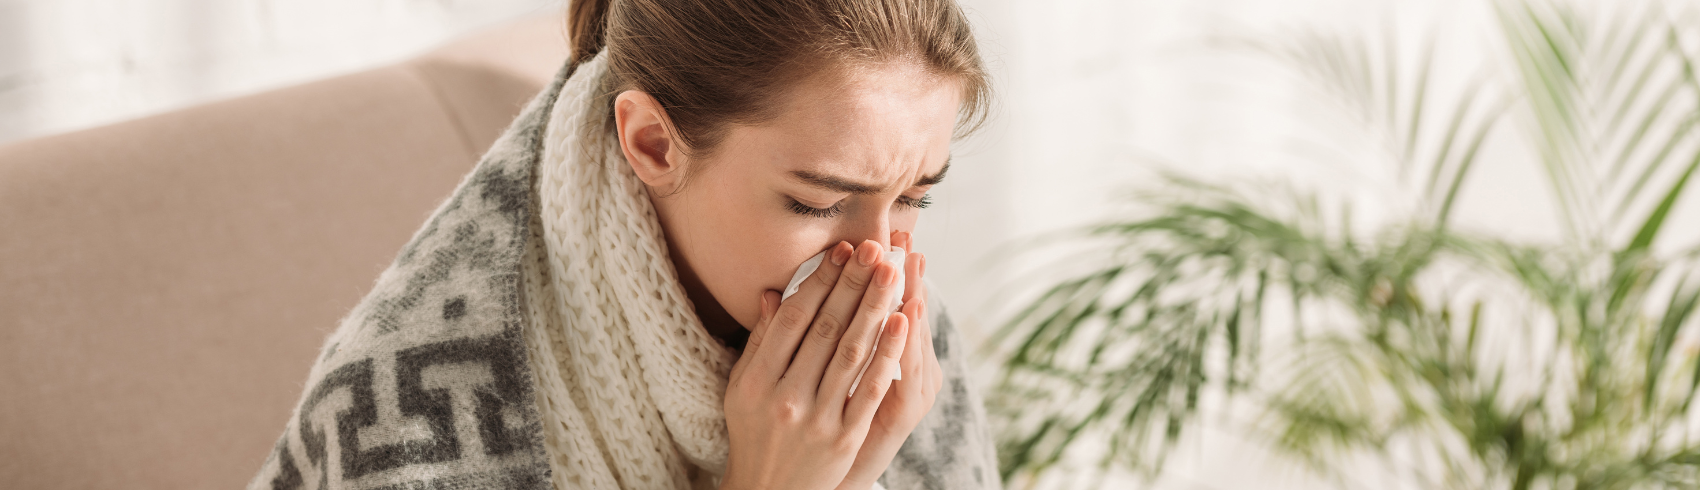 Spring Allergies 3: Are Unresolved Emotions Overwhelming Your Body?